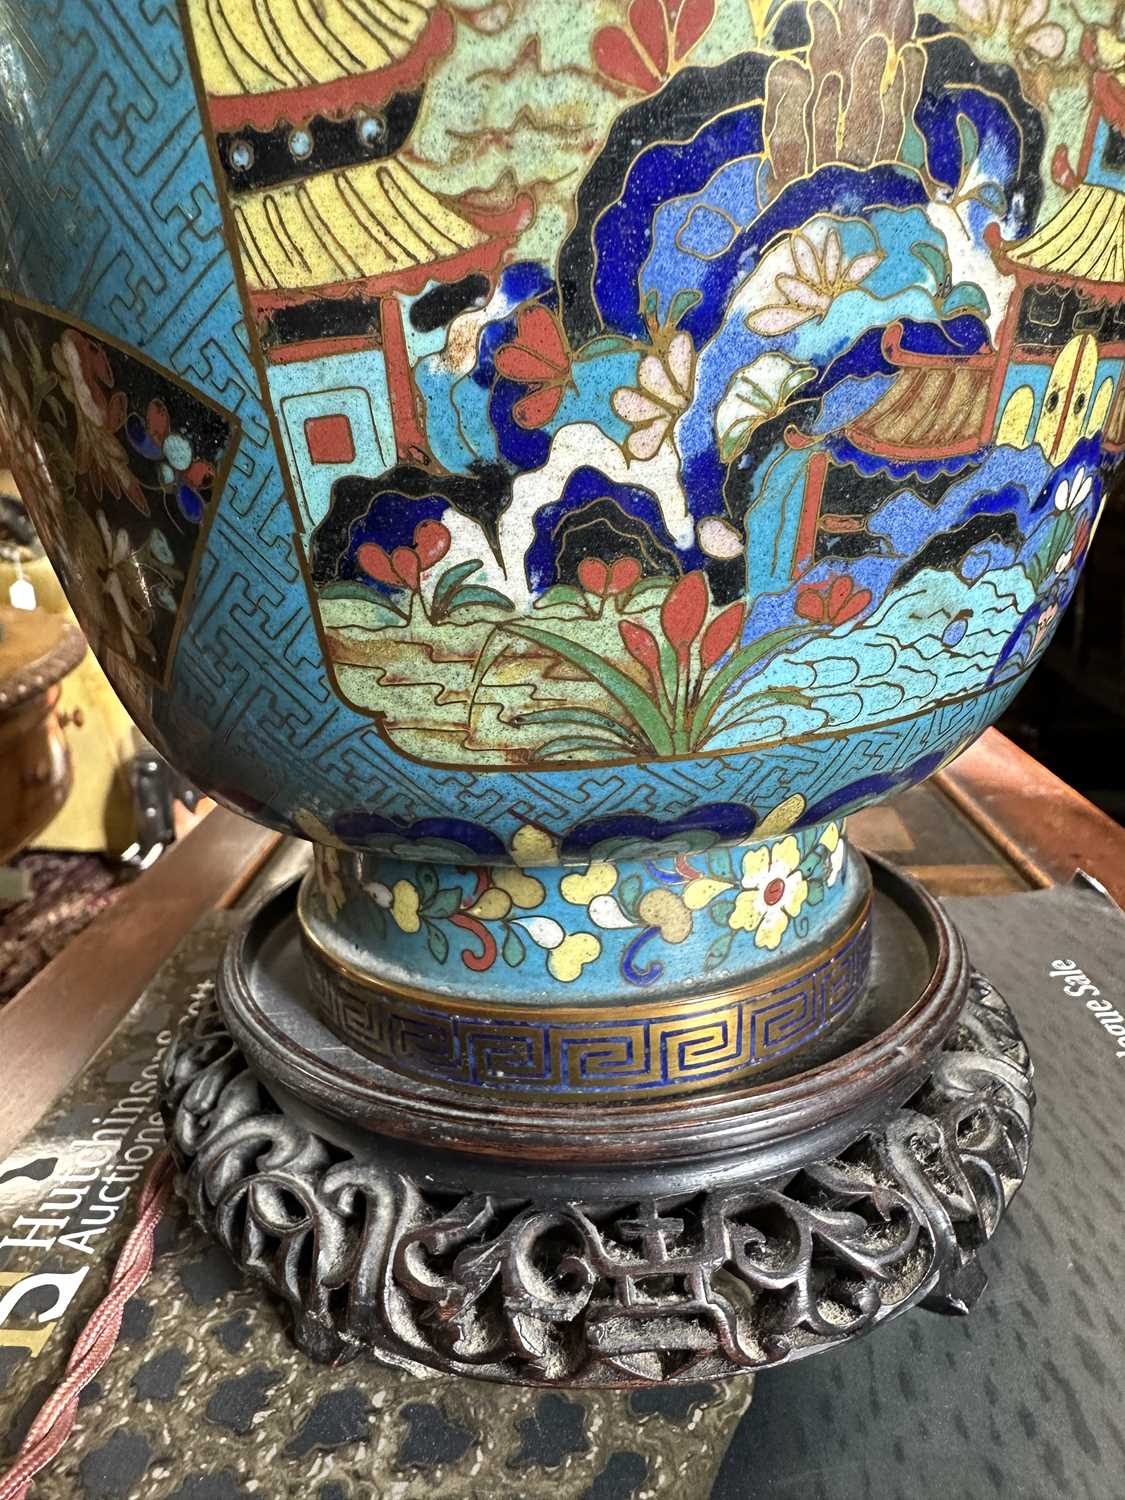 A LATE 19TH/EARLY 20TH CENTURY CENTURY CHINESE CLOISONNE VASE LAMP - Image 29 of 34